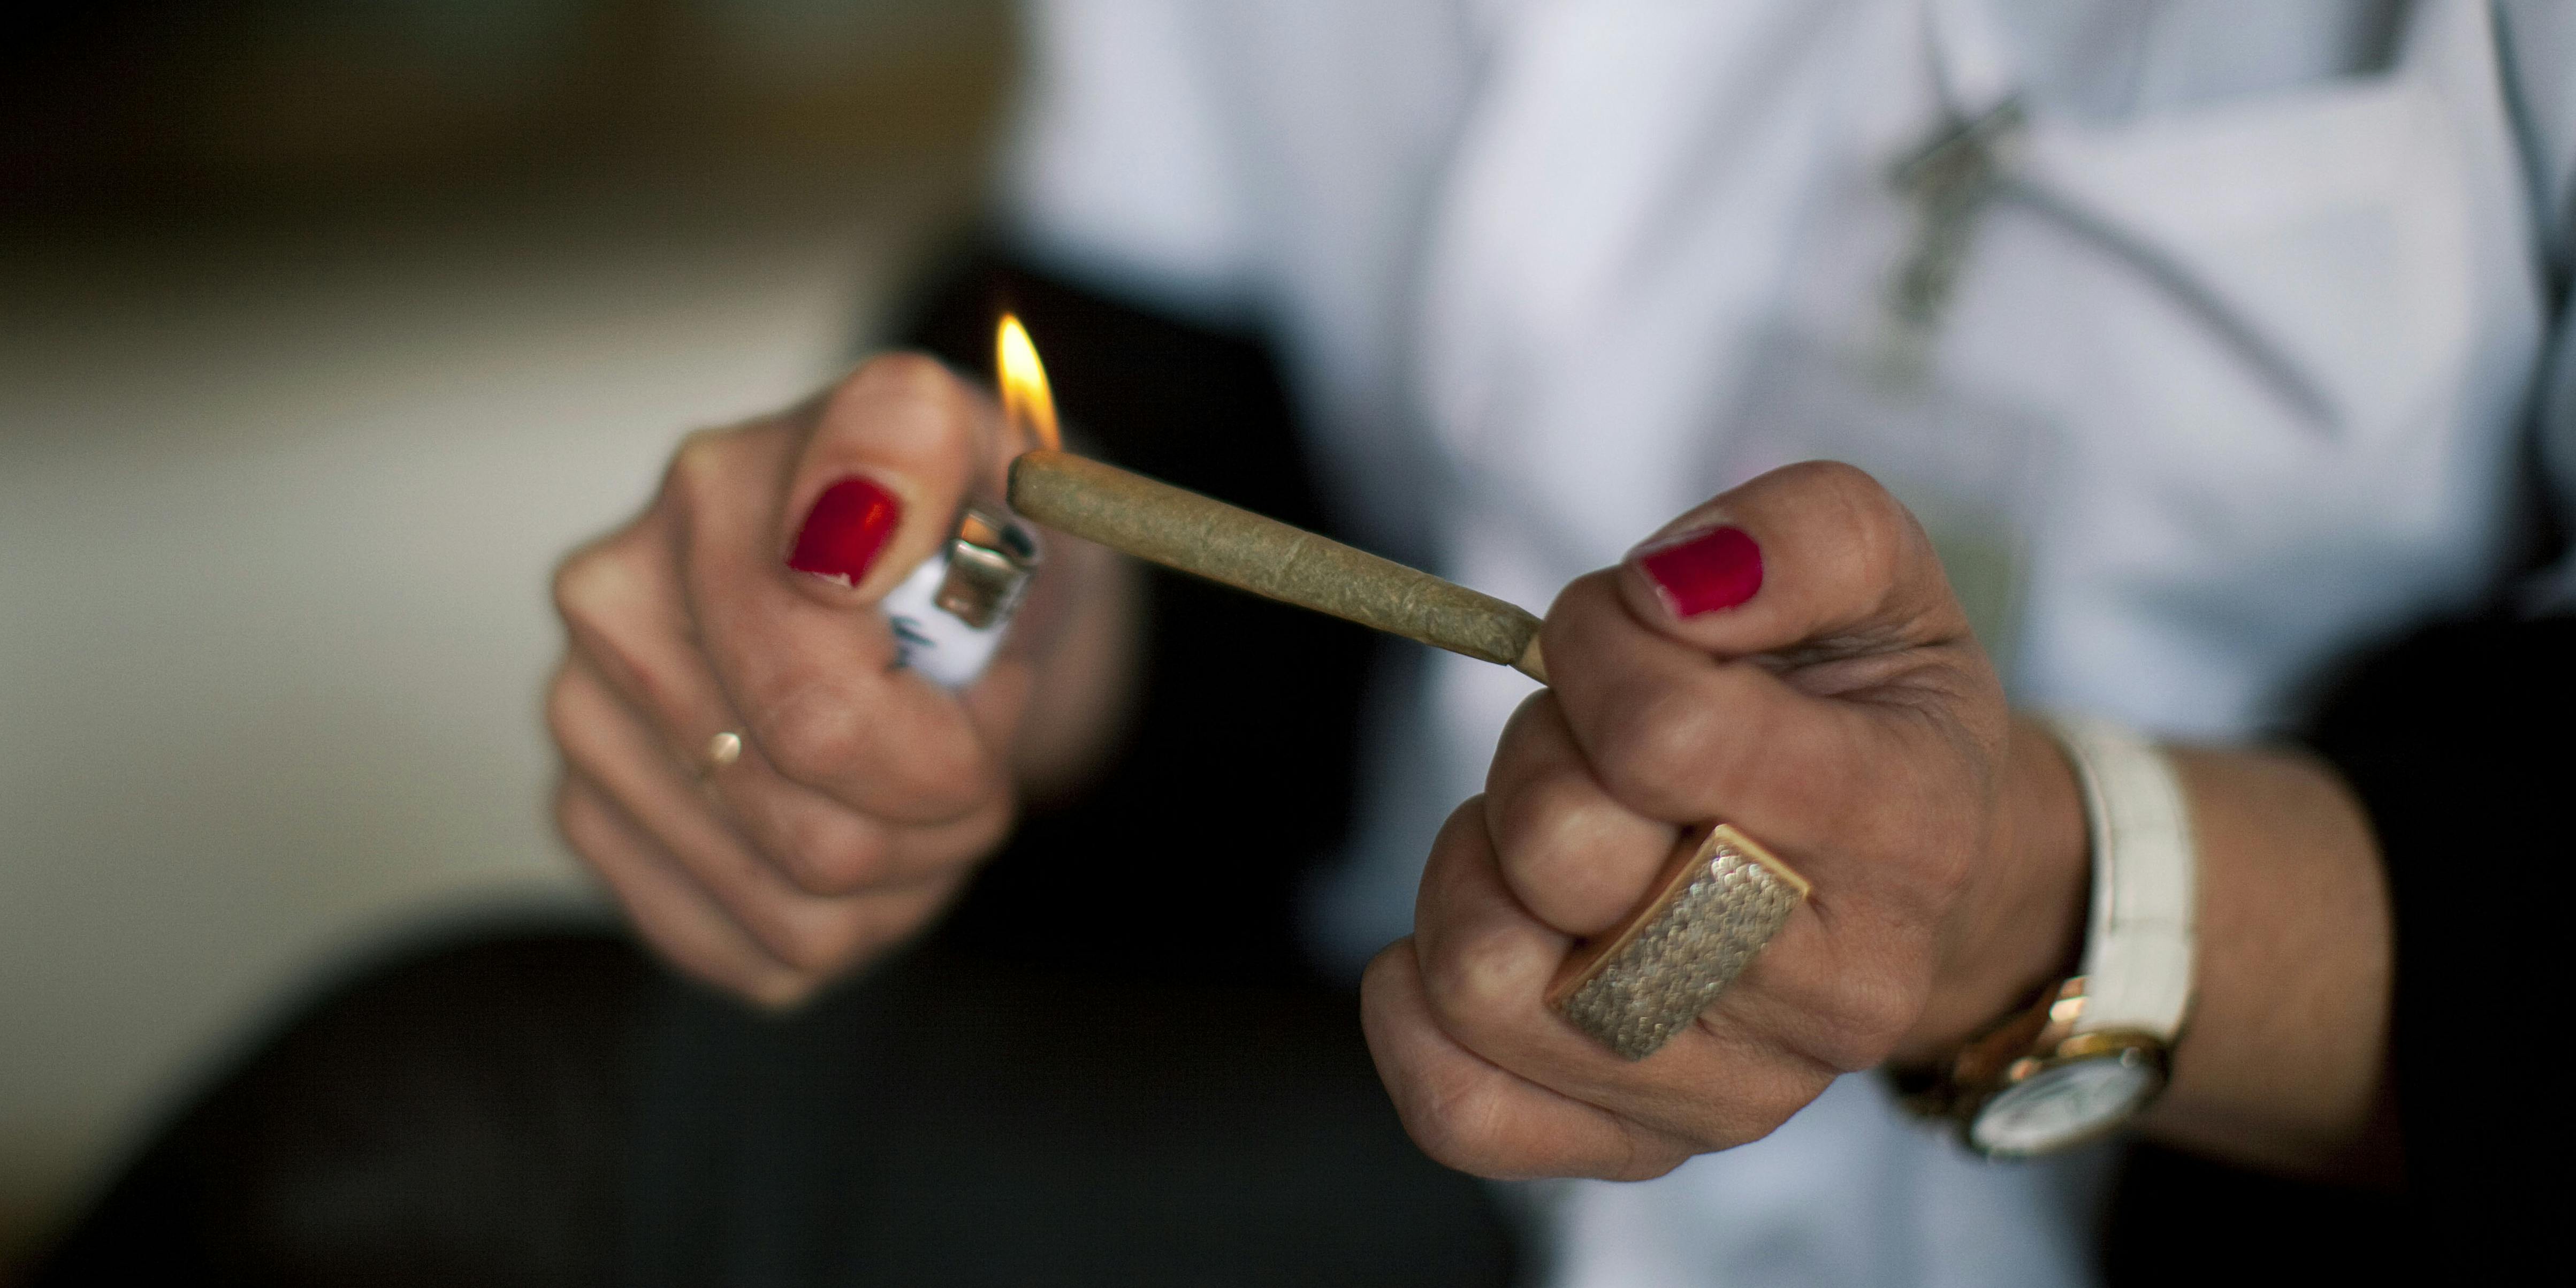 KIBUTZ NAAN, ISRAEL - MARCH 09: A nurse lights a cannabis cigarette for a patient at the Hadarim nursing home, on March 09, 2011 in Kibutz Naan, Israel. NiaMedic just announced it will bring the first clinic like it to America (Photo by Uriel Sinai/Getty Images)